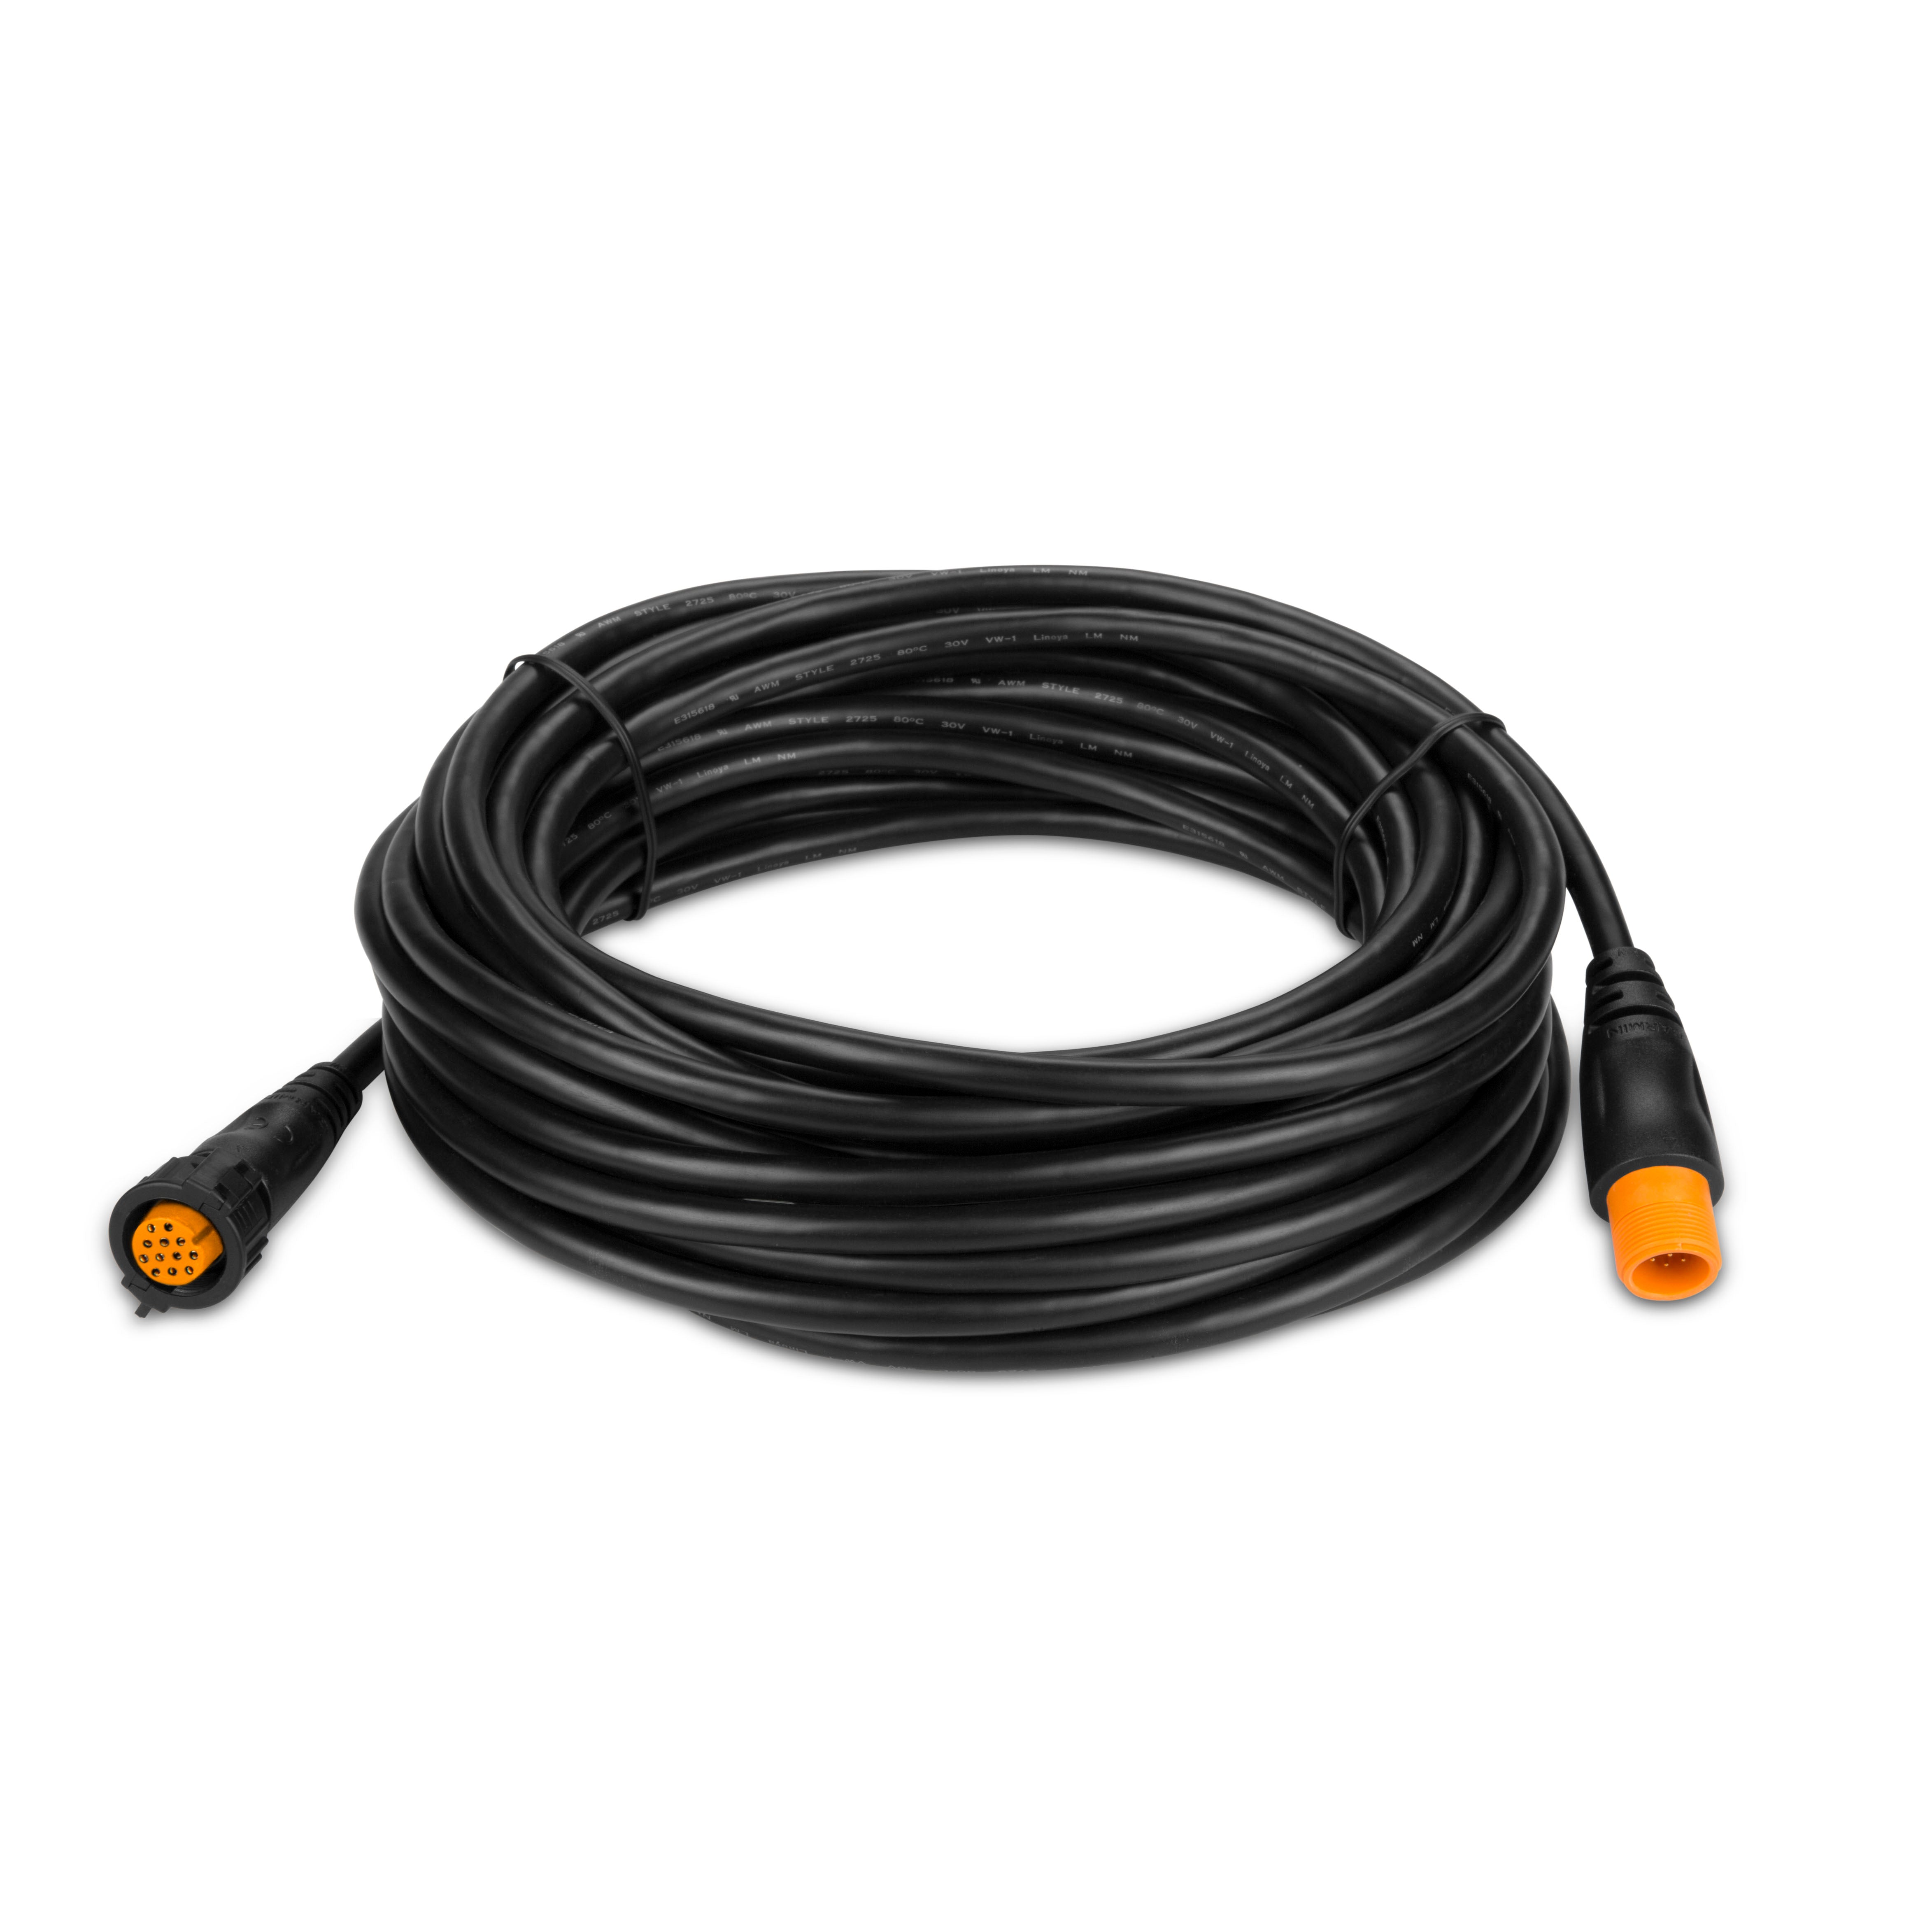 Garmin Transducer with XID extension cable (12-pin), 9 meters (30 feet)